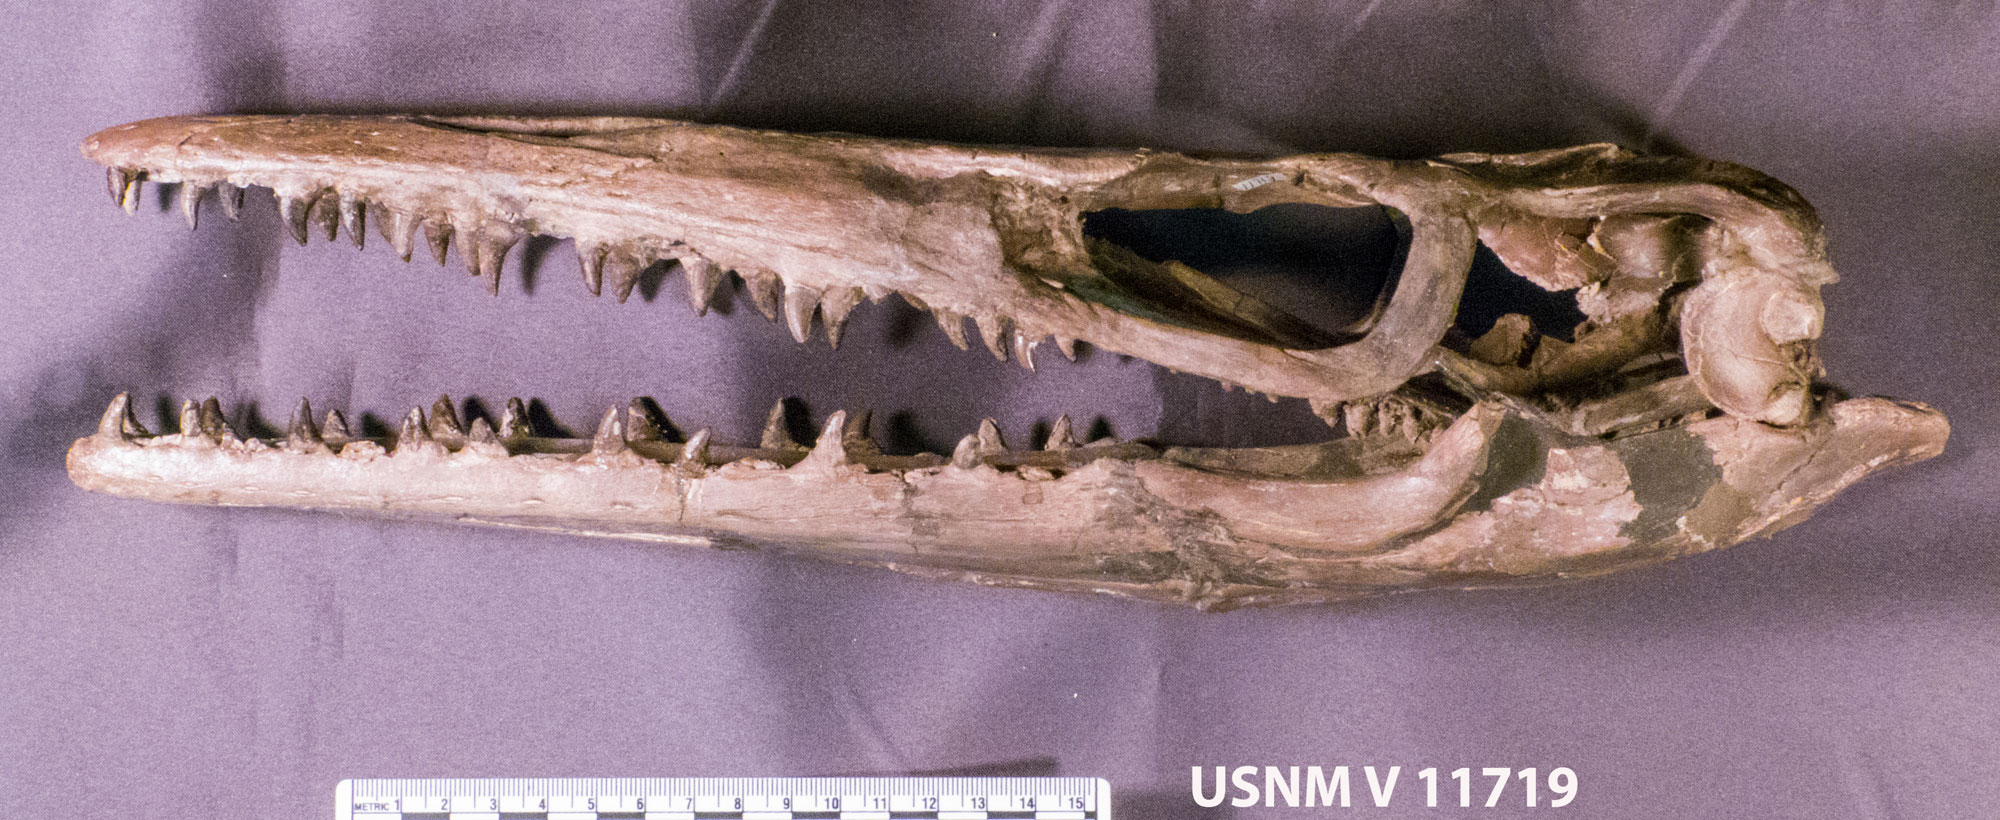 Photo of the narrow, elongated skull of the mosasaur Clidastes with many pointed teeth.